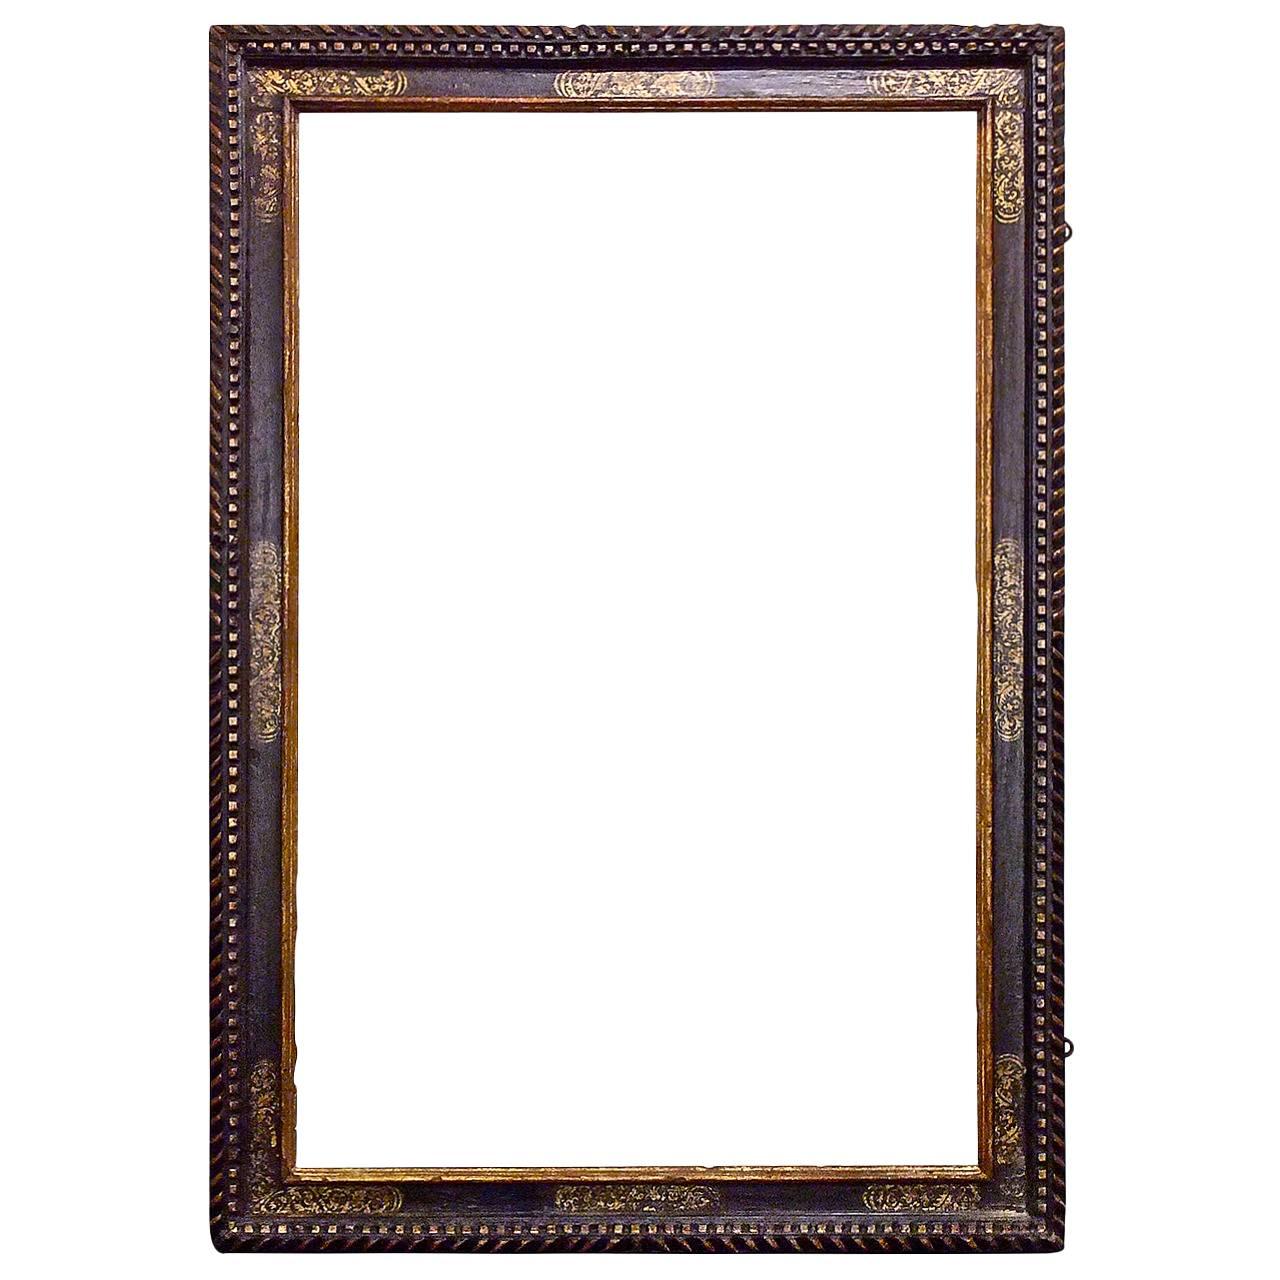 Dramatically Large Carved, Gilded and Polychrome Spanish Baroque Frame